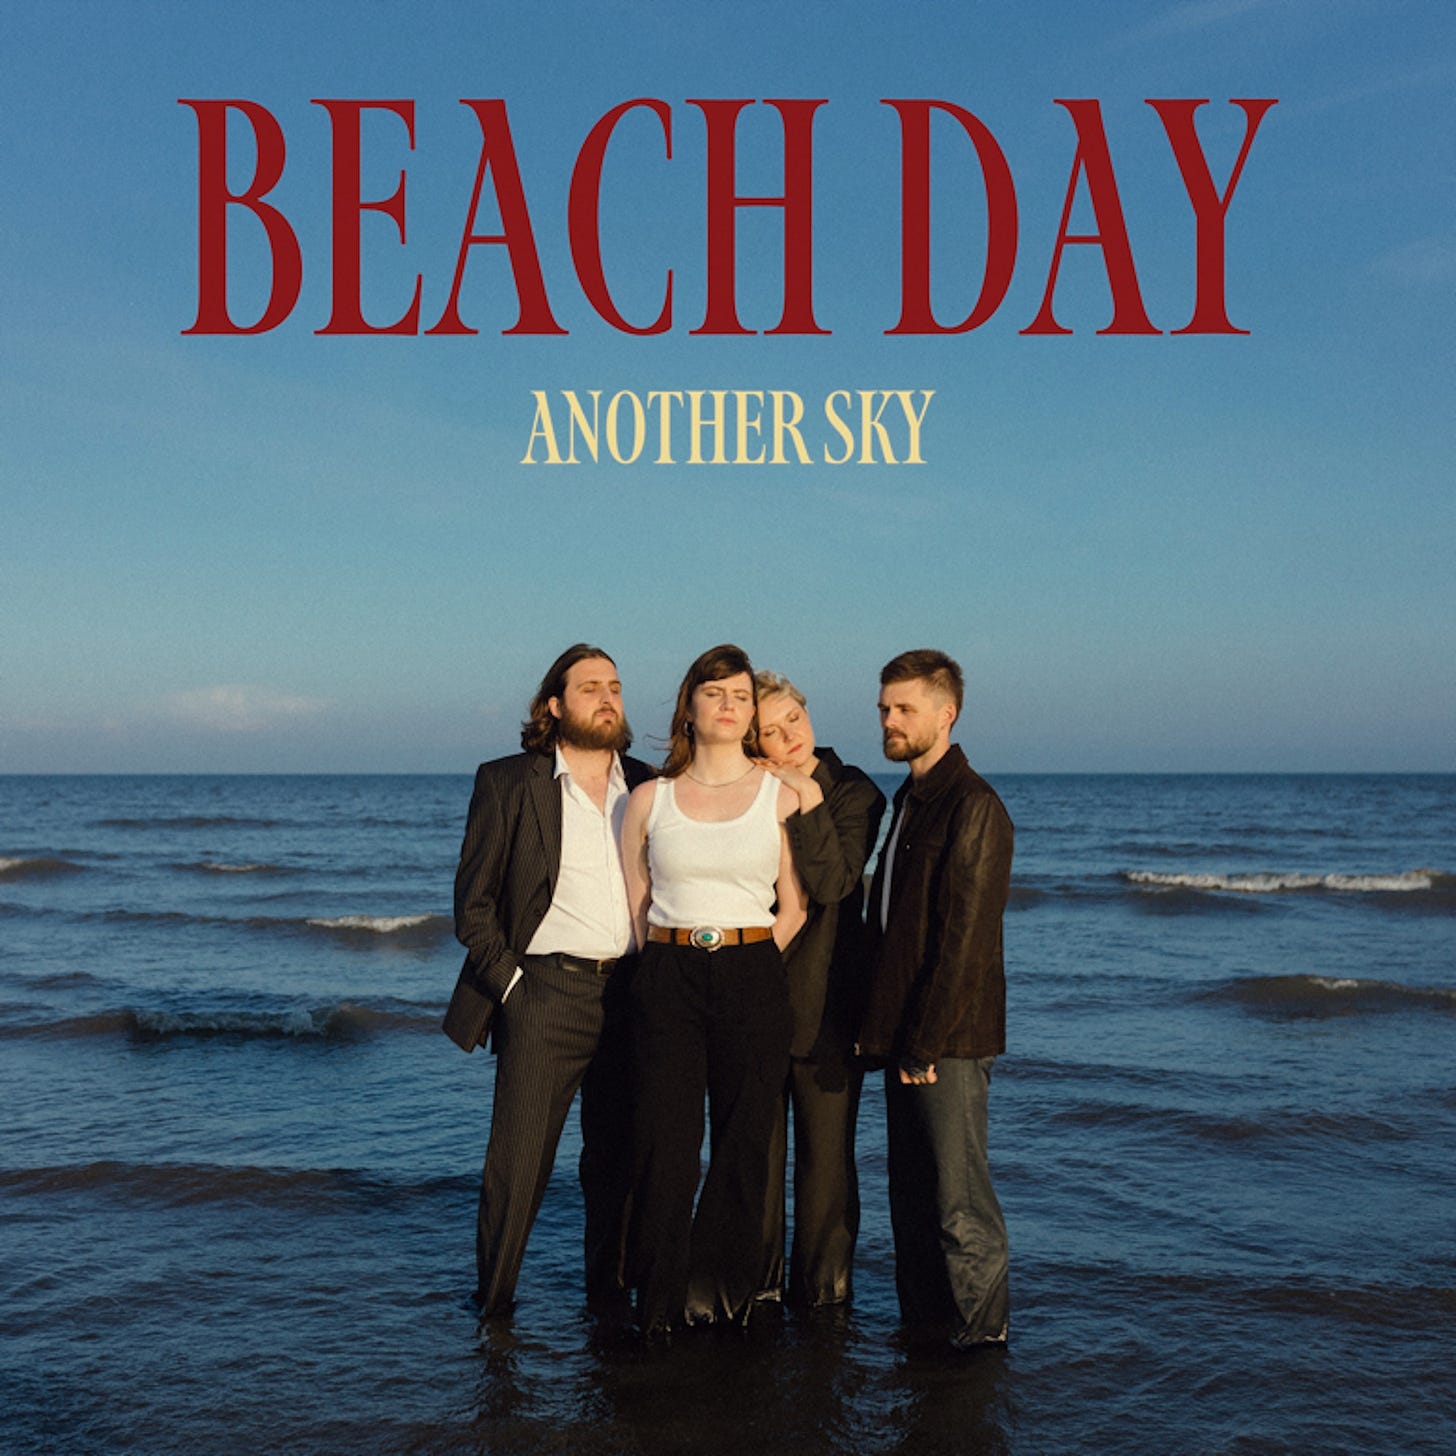 Another Sky announce new album 'Beach Day' with new B-side track